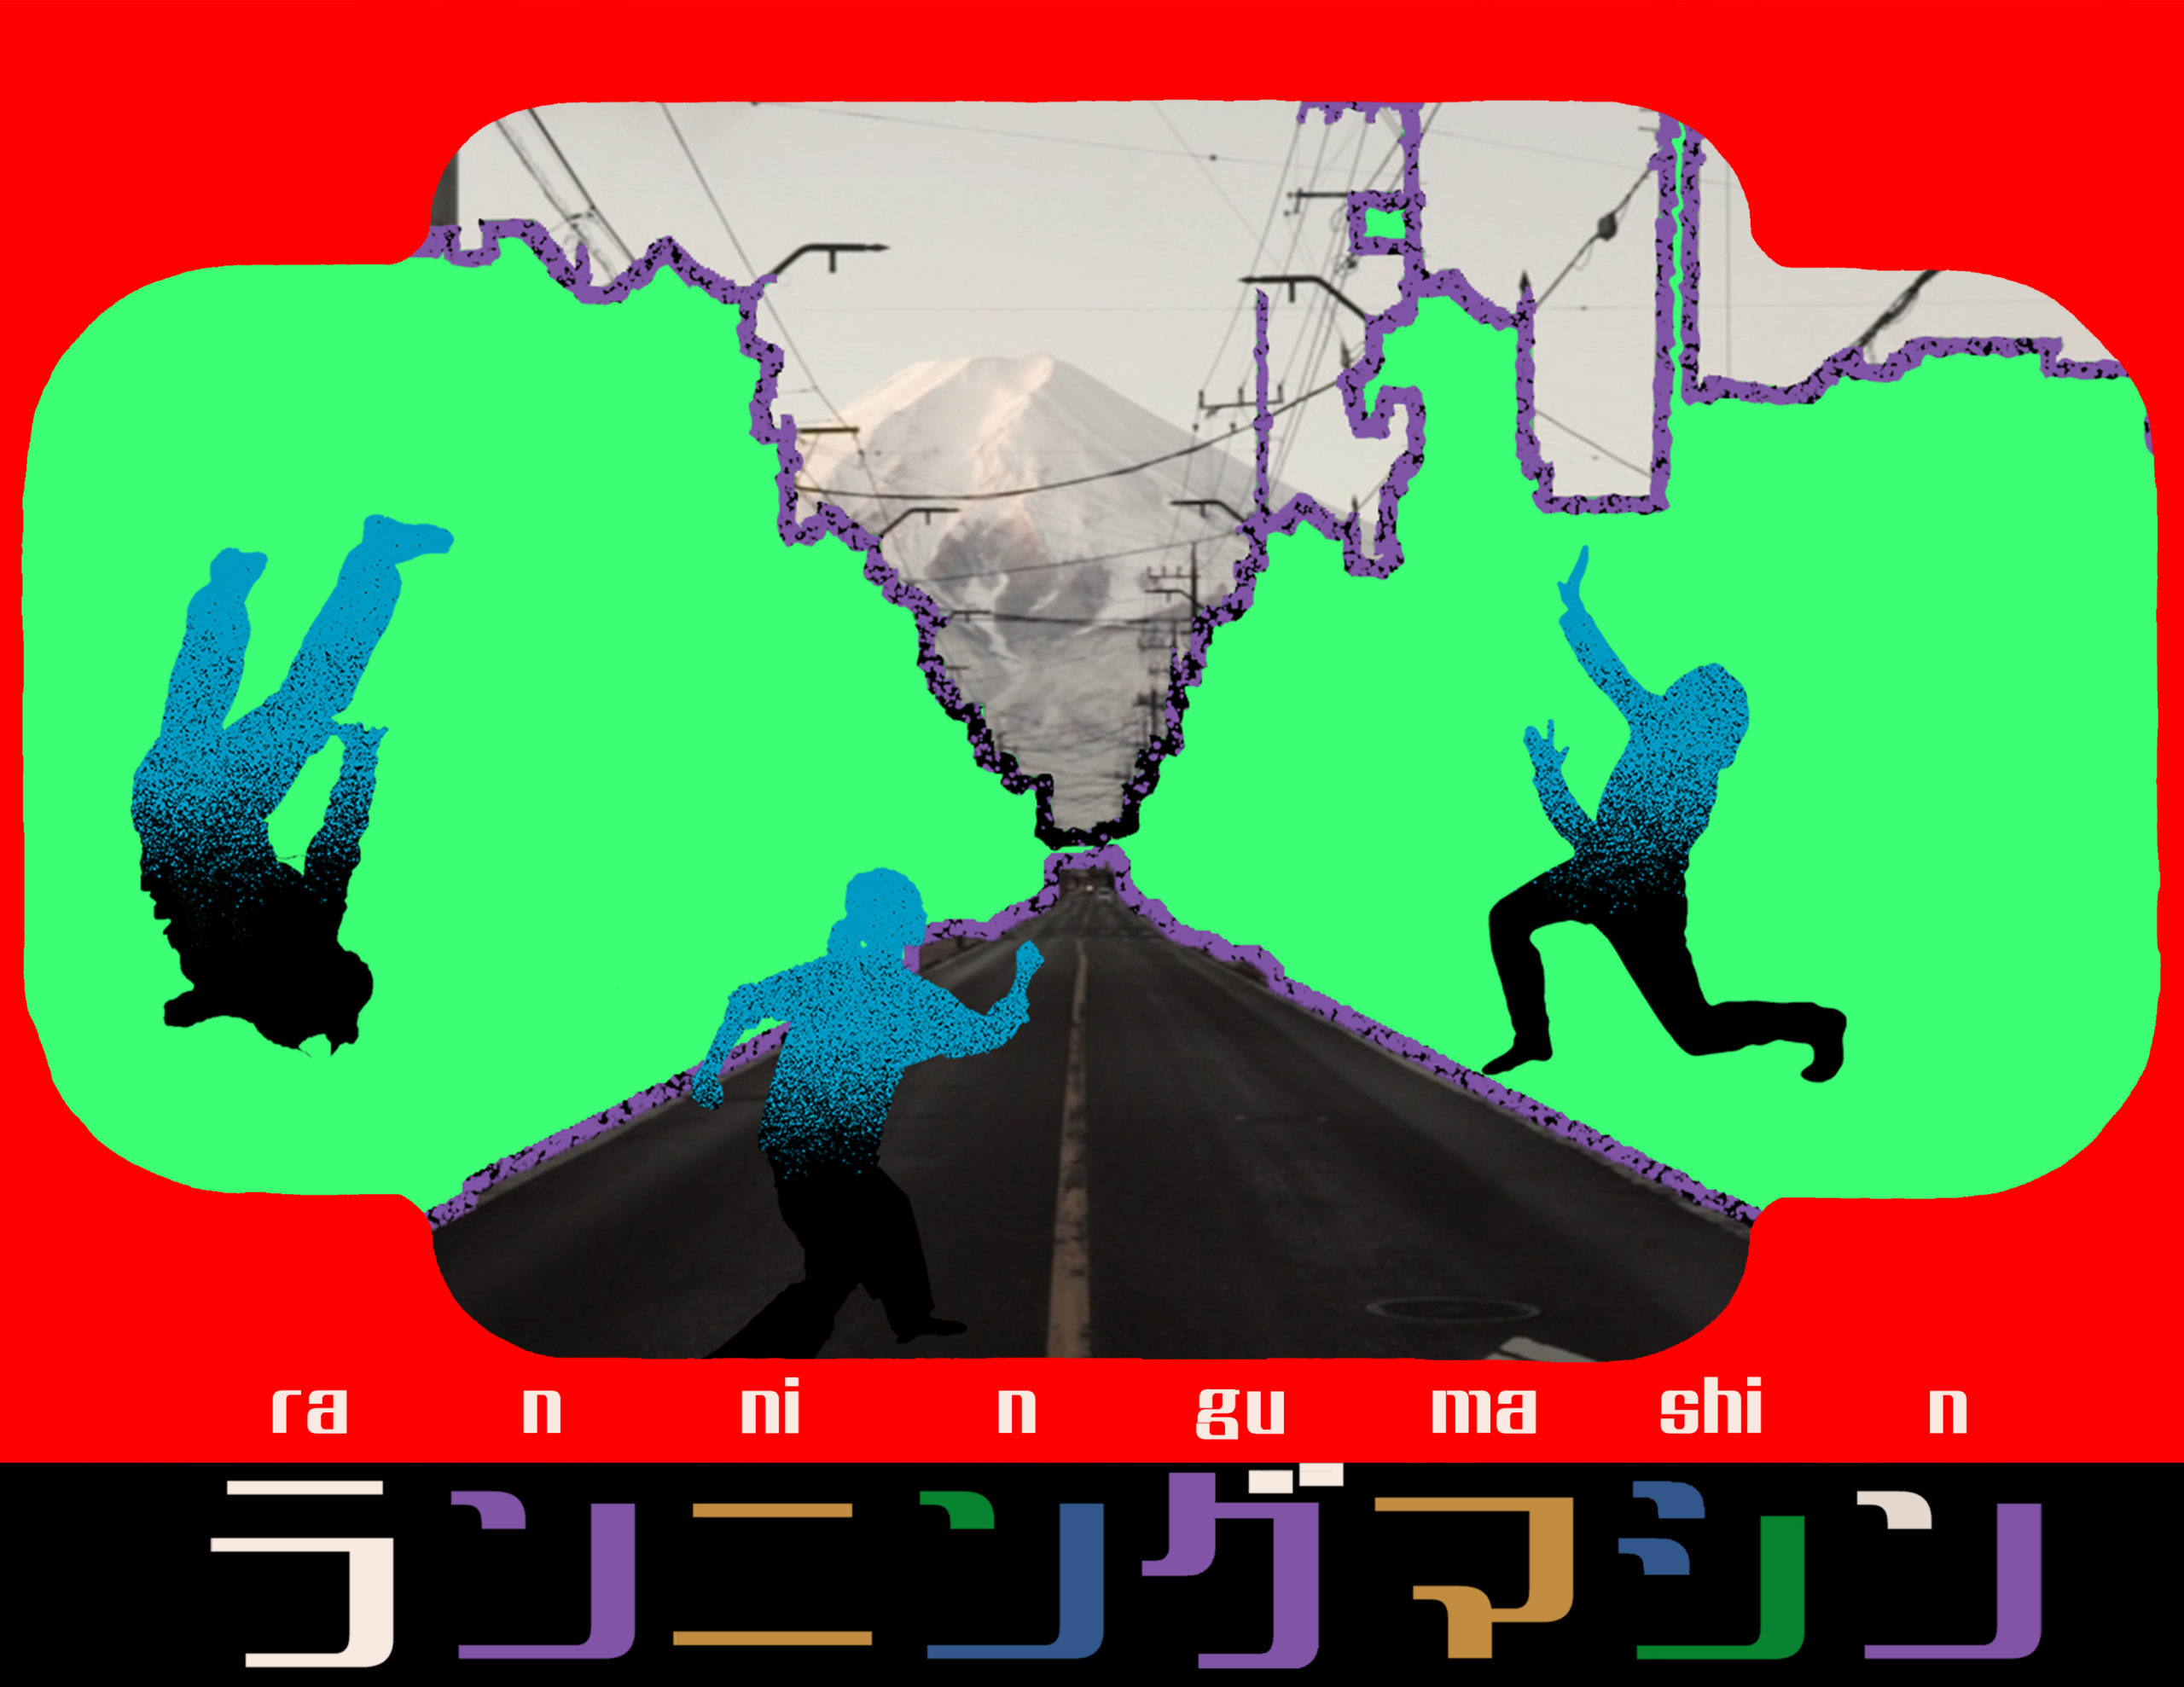 Running Machine - Three dancing figures appear on a background of Chromakey green with a snow covered mountain between them and the title of the work Running Machine written in Japanese Kanji